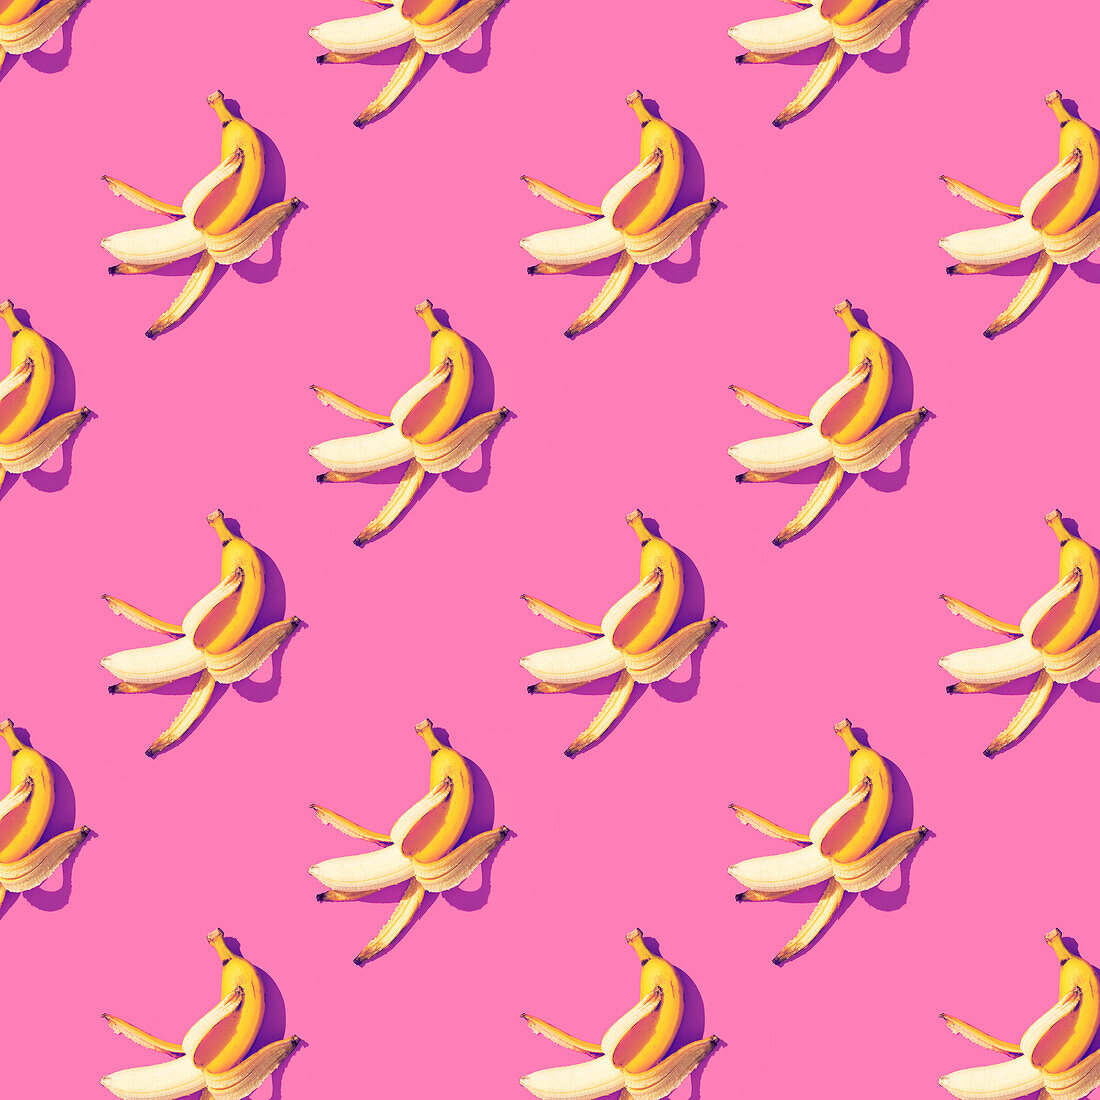 Ripe bananas, partly peeled, on a pink background